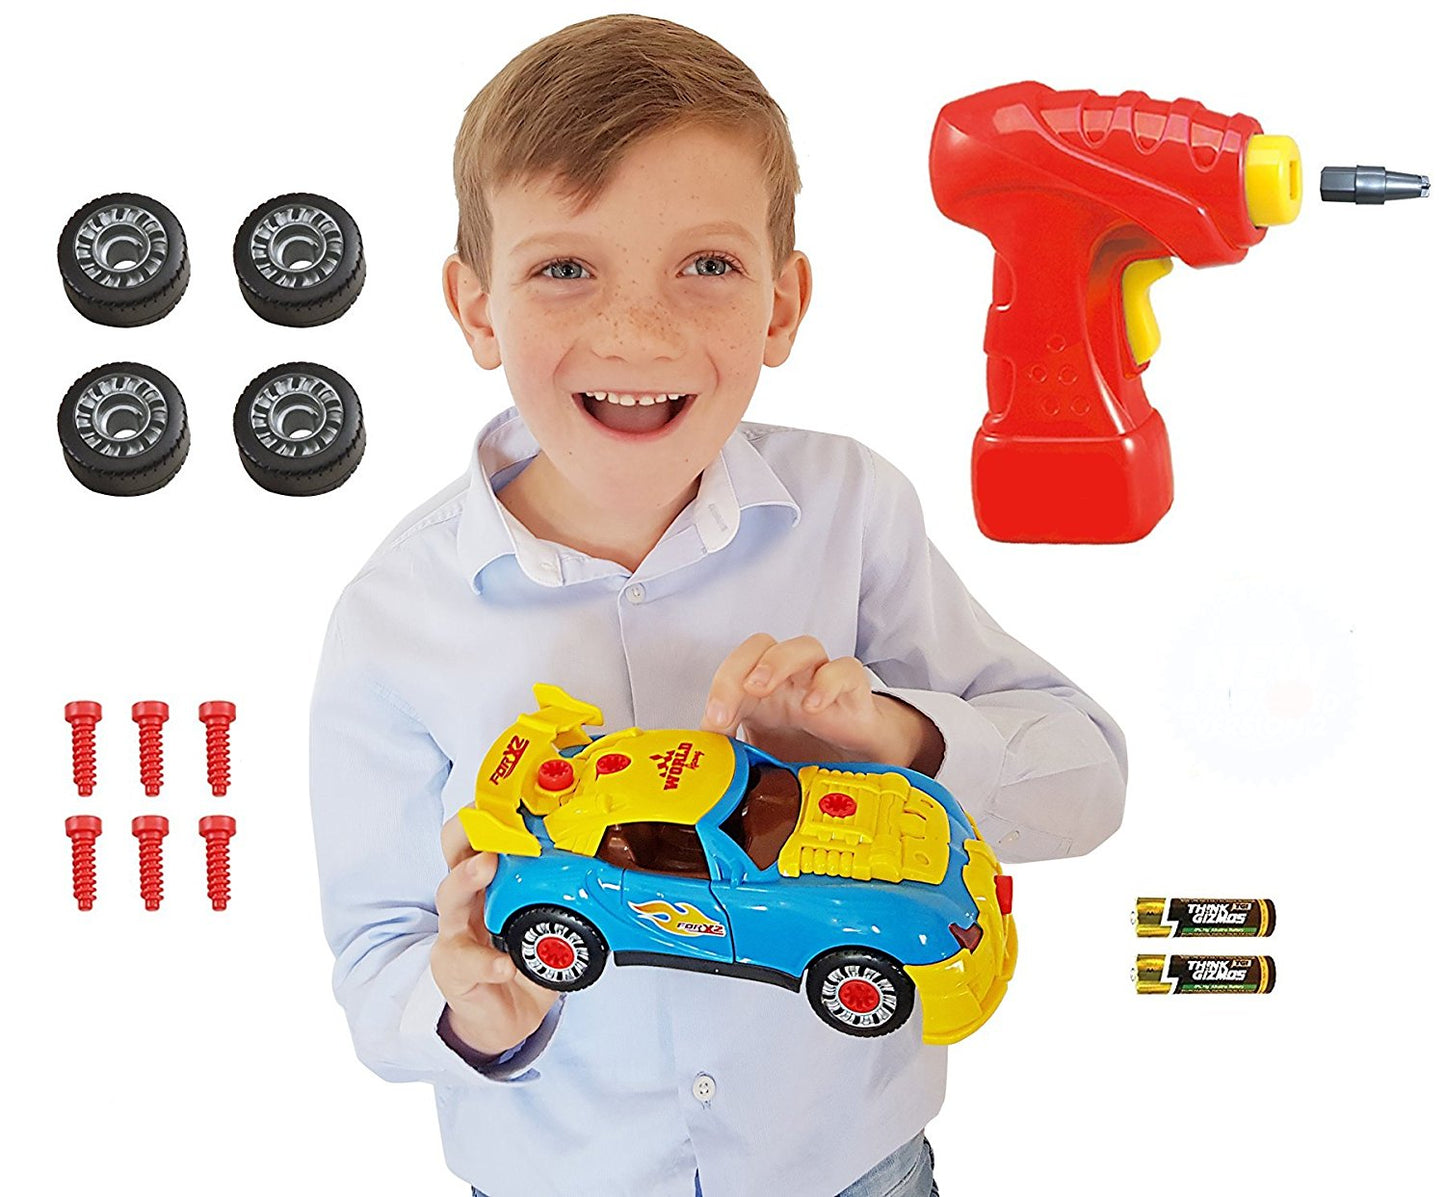 Take Apart Toy Racing Car – Construction Toy Kit For Kids – Build Your Own Car Kit (Version 2!!) – 30 Take Apart Pieces With Realistic Sounds & Lights By ThinkGizmos (Trademark Protected)